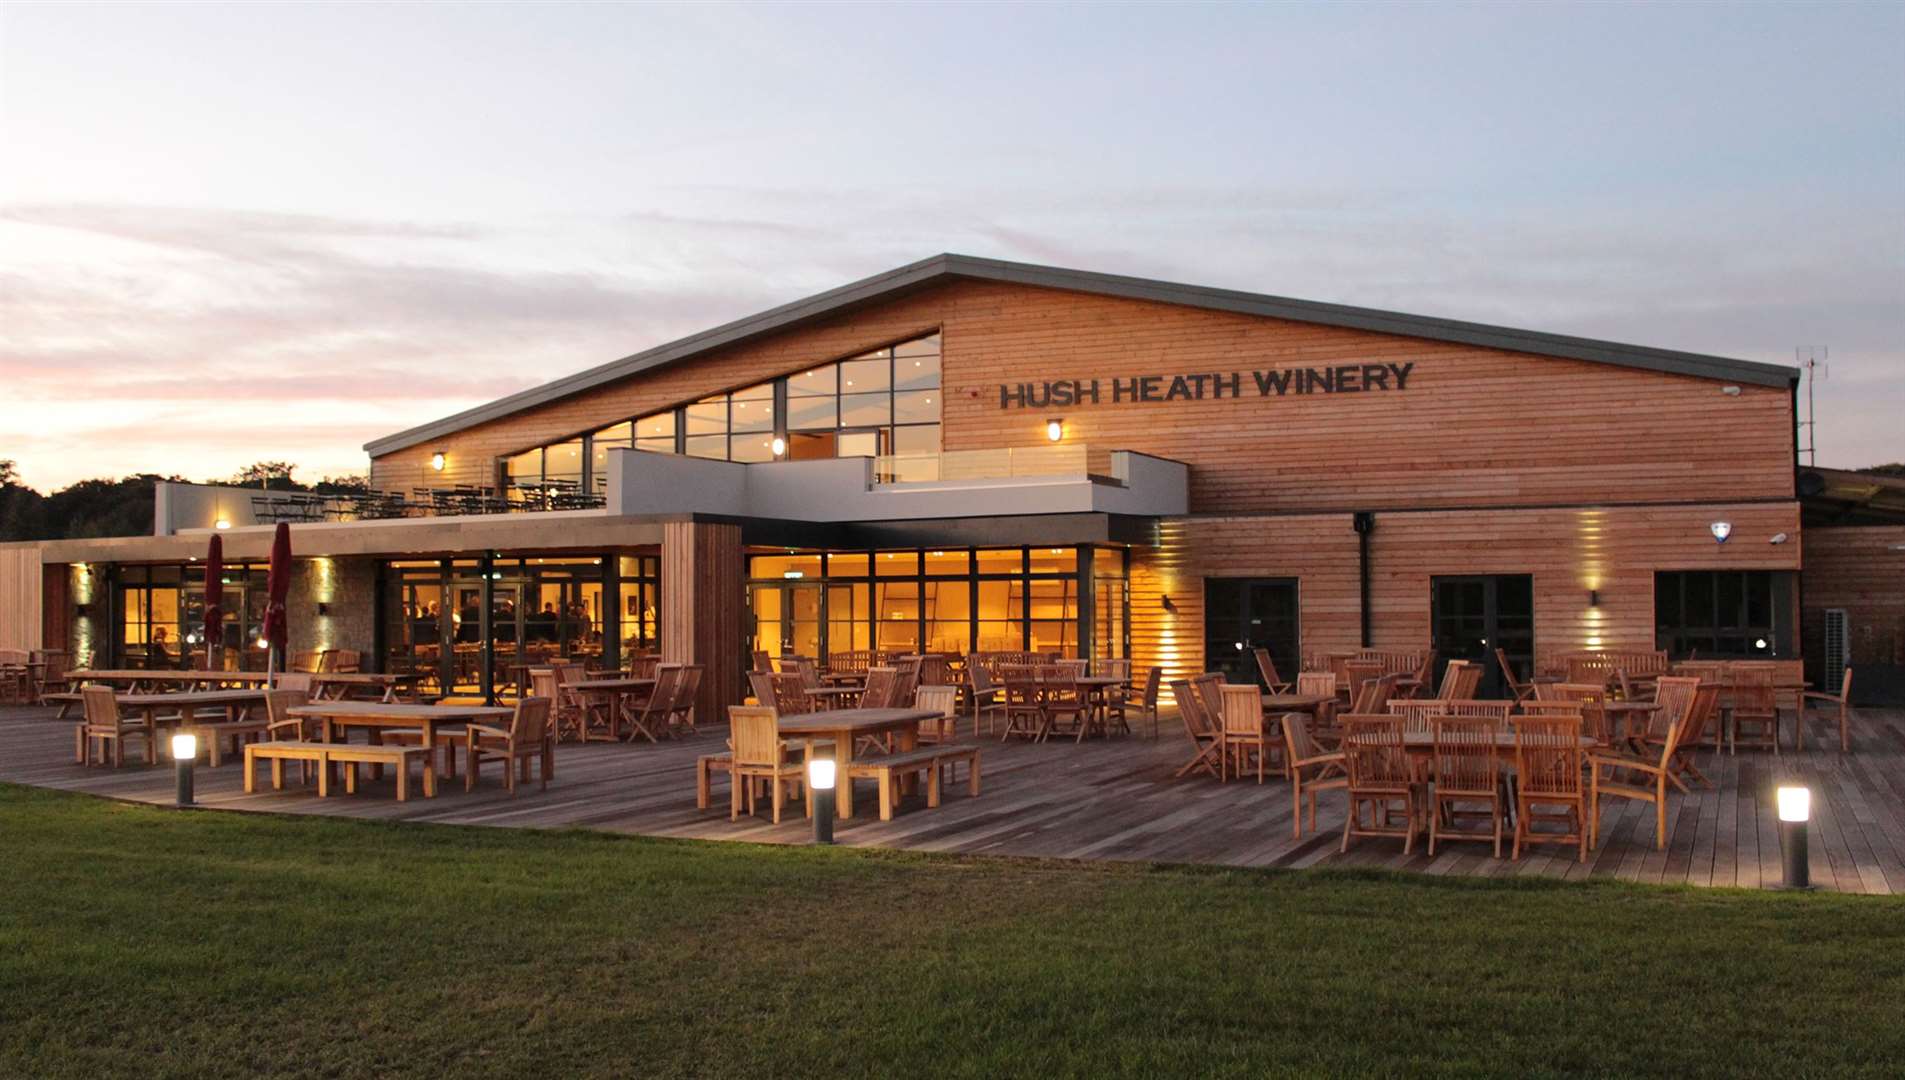 Hush Heath Winery in Staplehurst will be helping to raise funds for the Tree of Hope charity